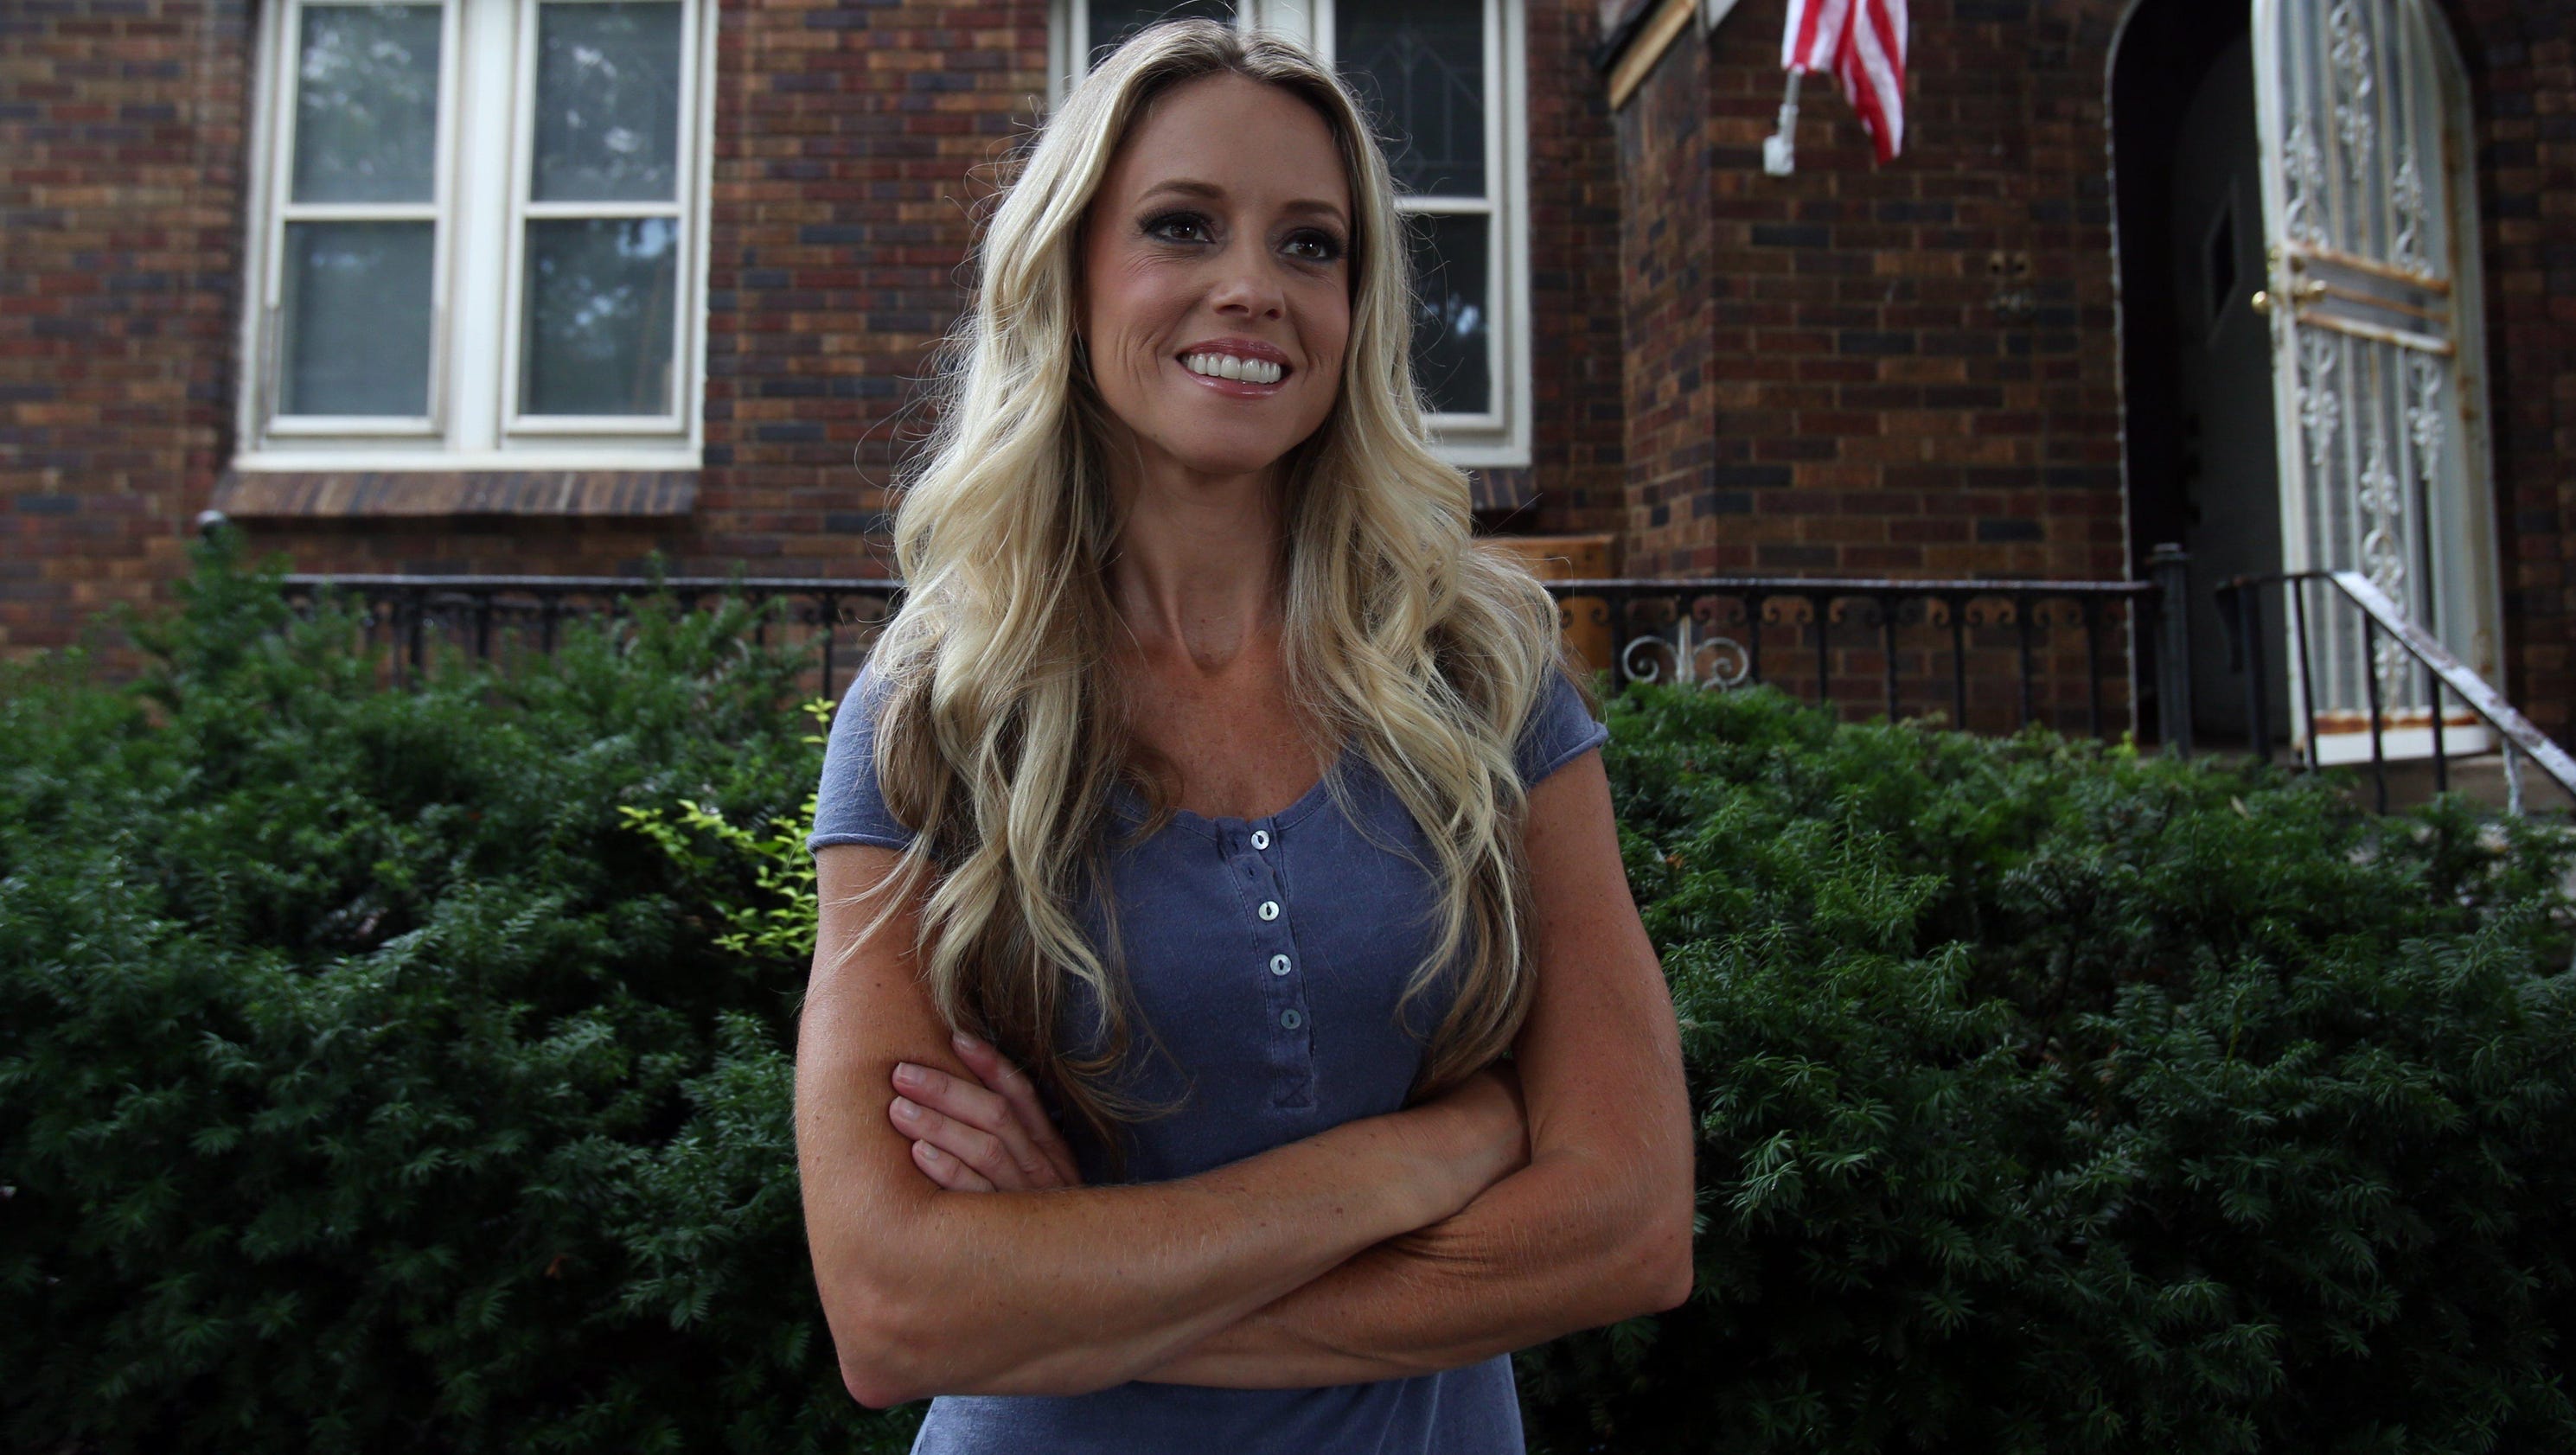 Hgtv Host Nicole Curtis Deletes Carjacking Post From Facebook